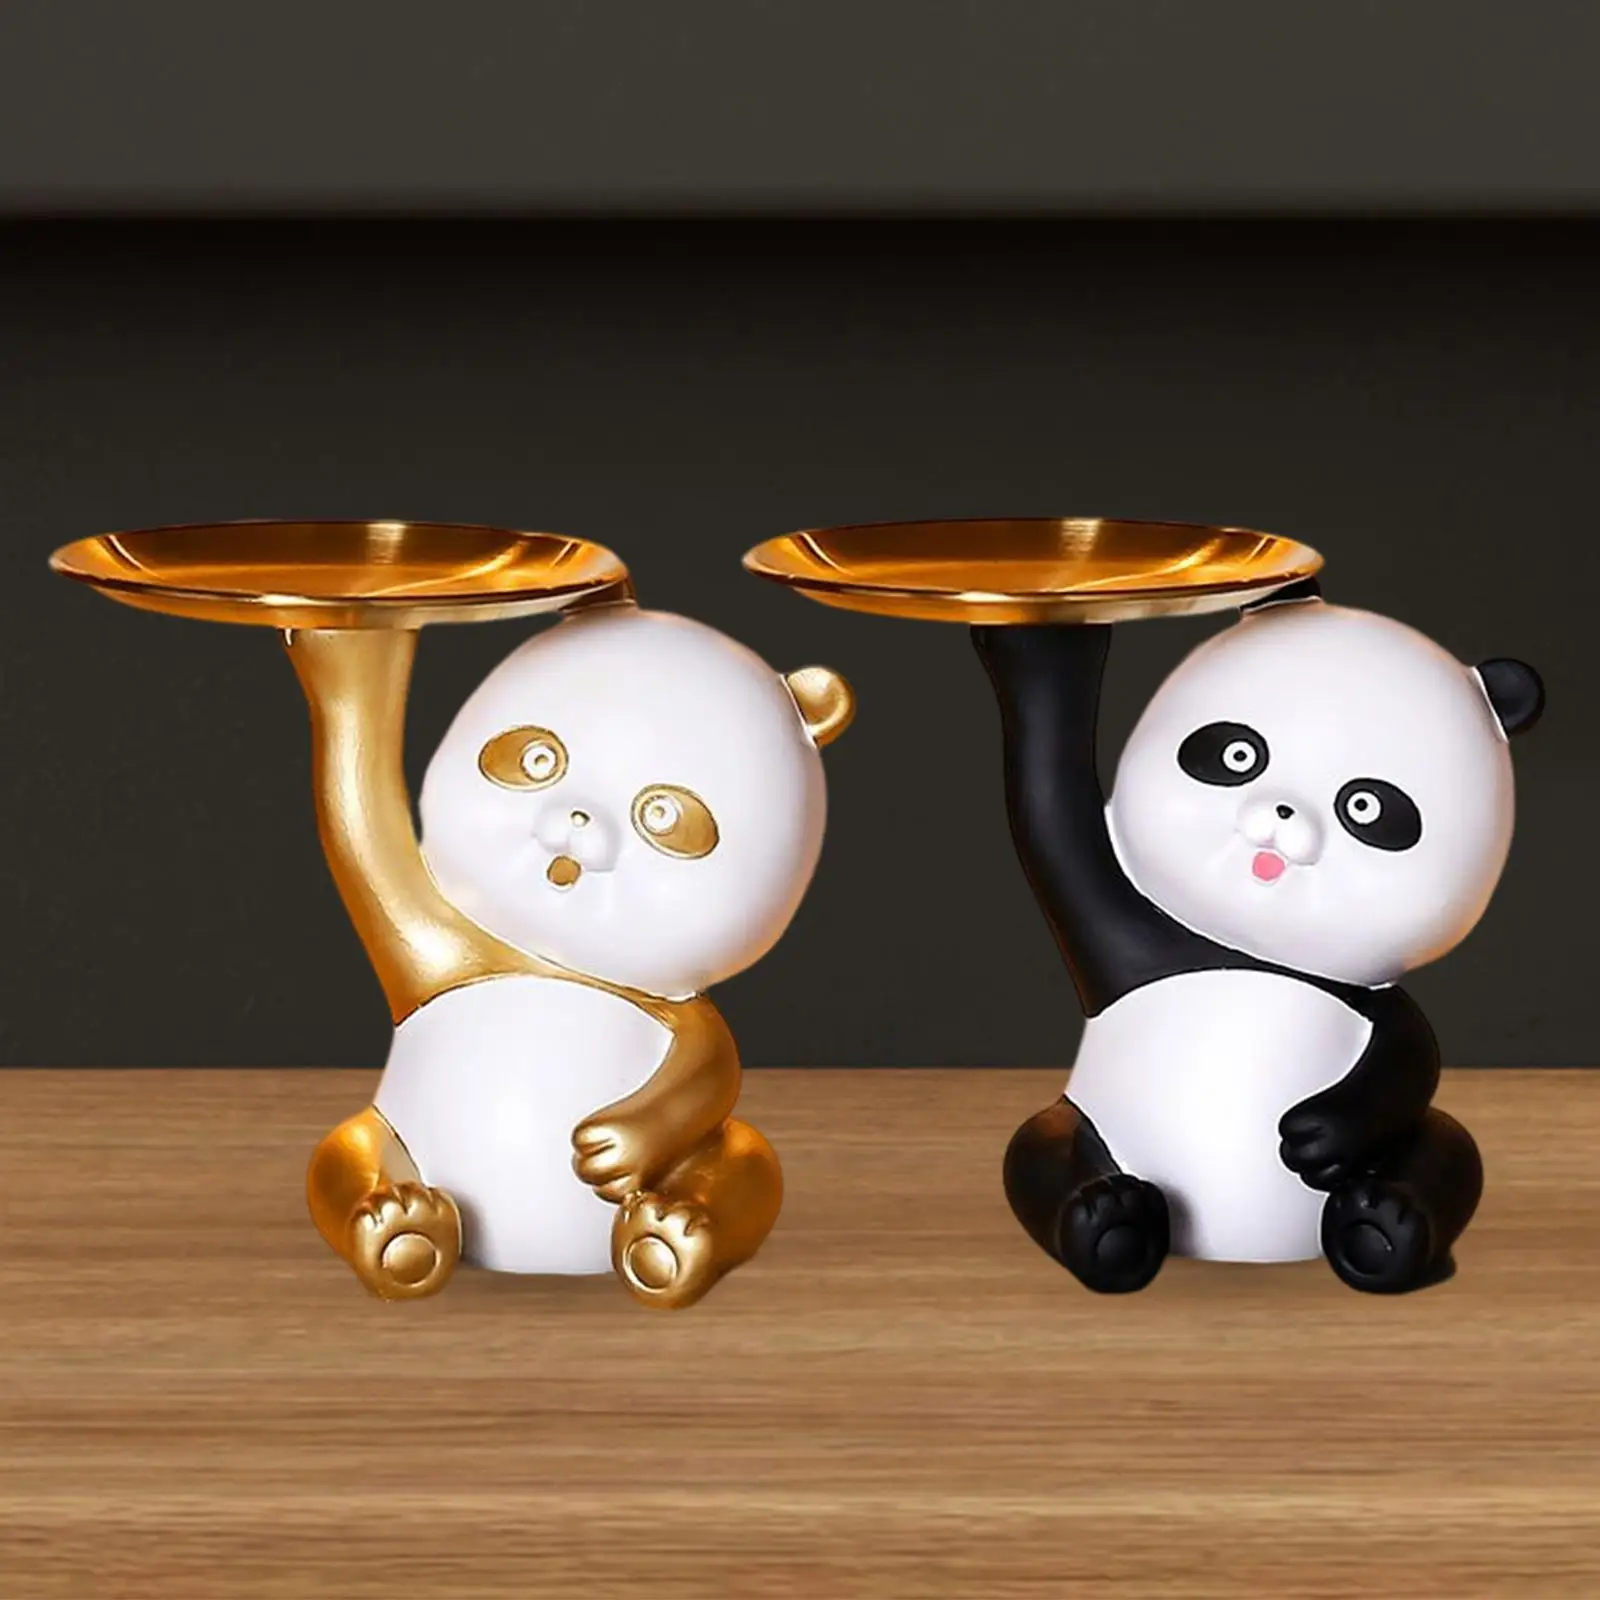 Multifunction Panda Sculpture with Storage Tray Desk Storage Statue Resin Storage Holder for Table Office Home Cabinet Decor